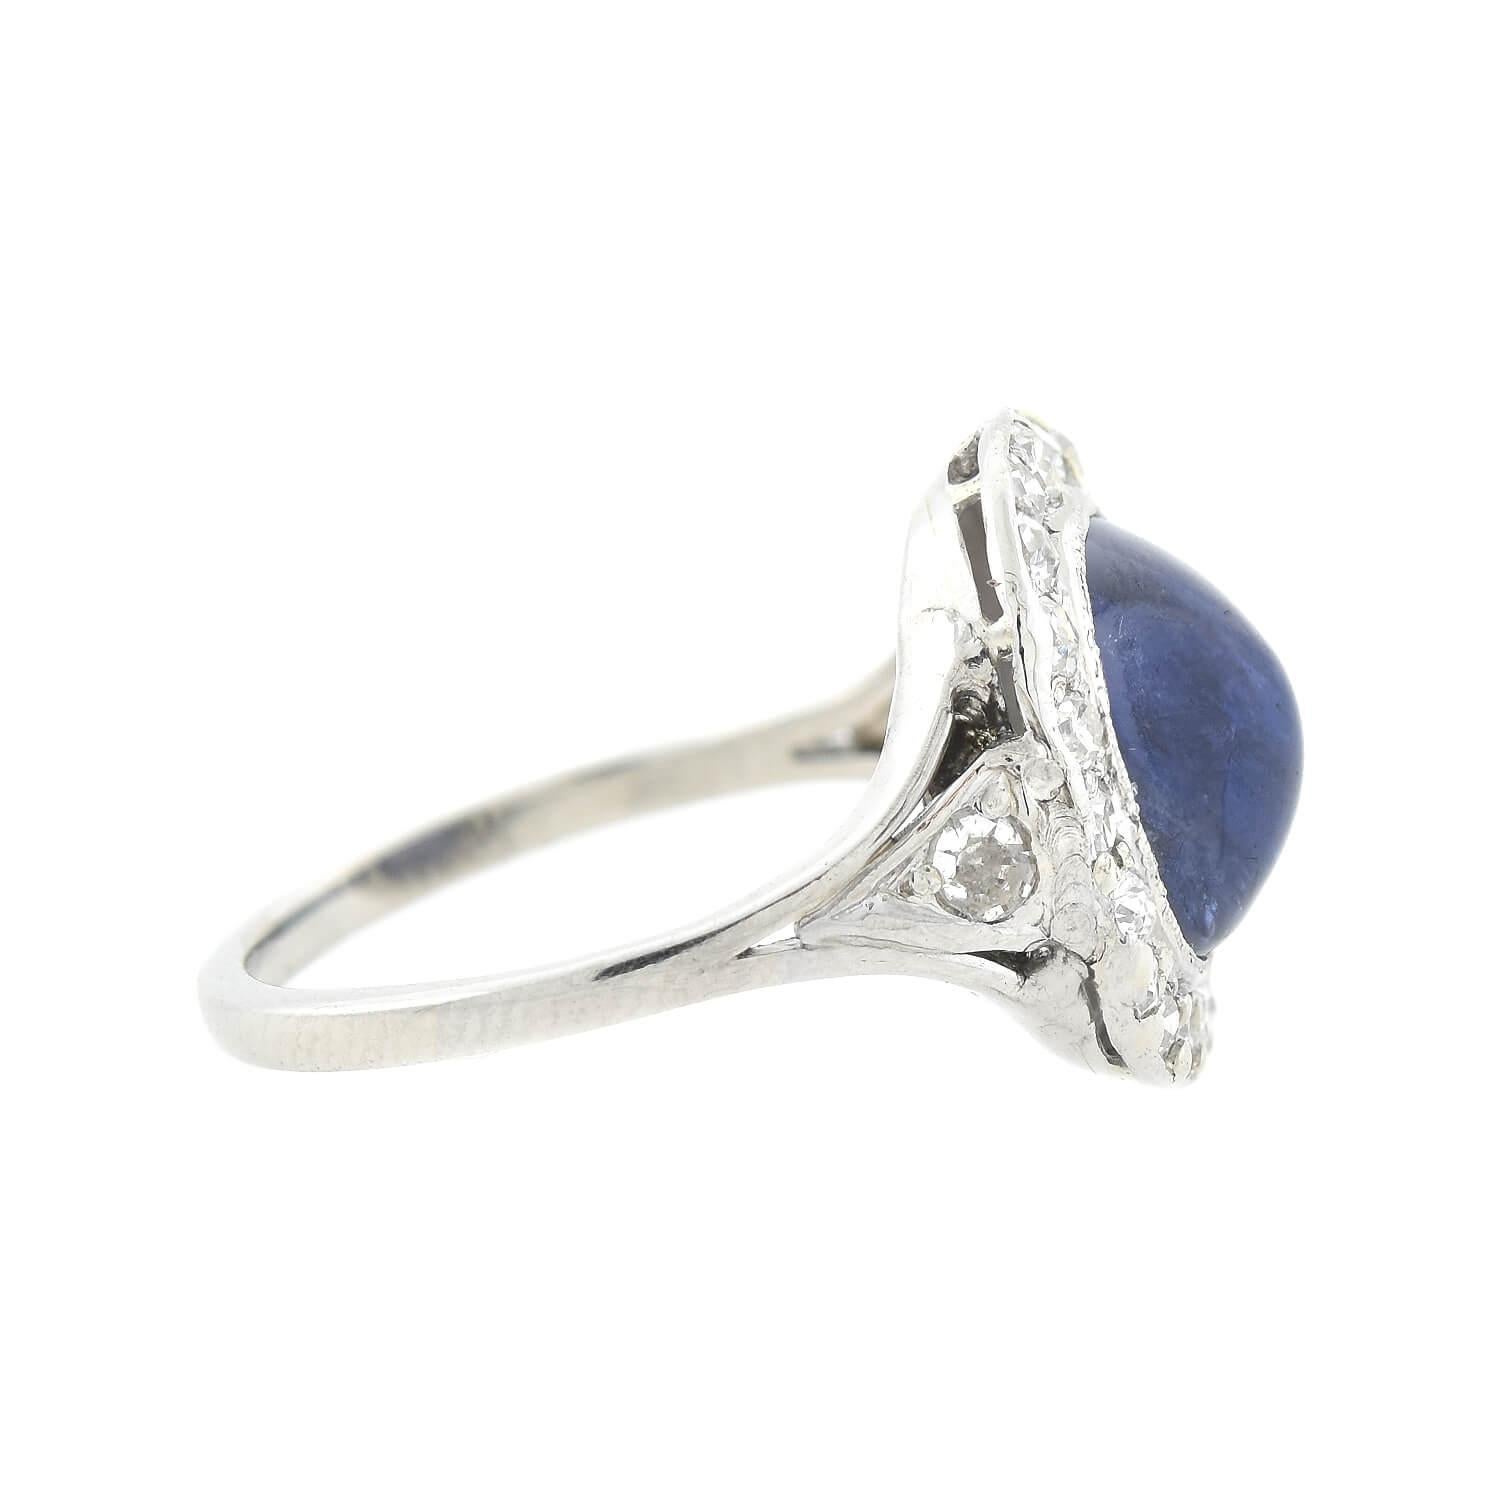 A gorgeous sapphire cabochon ring from the Edwardian (ca1910s) era! Handmade and crafted in platinum, this ring adorns a 3ctw+ no-heat Ceylon sapphire cabochon. The sapphire displays a stunning blue hue, complemented by its milgrained bezel setting